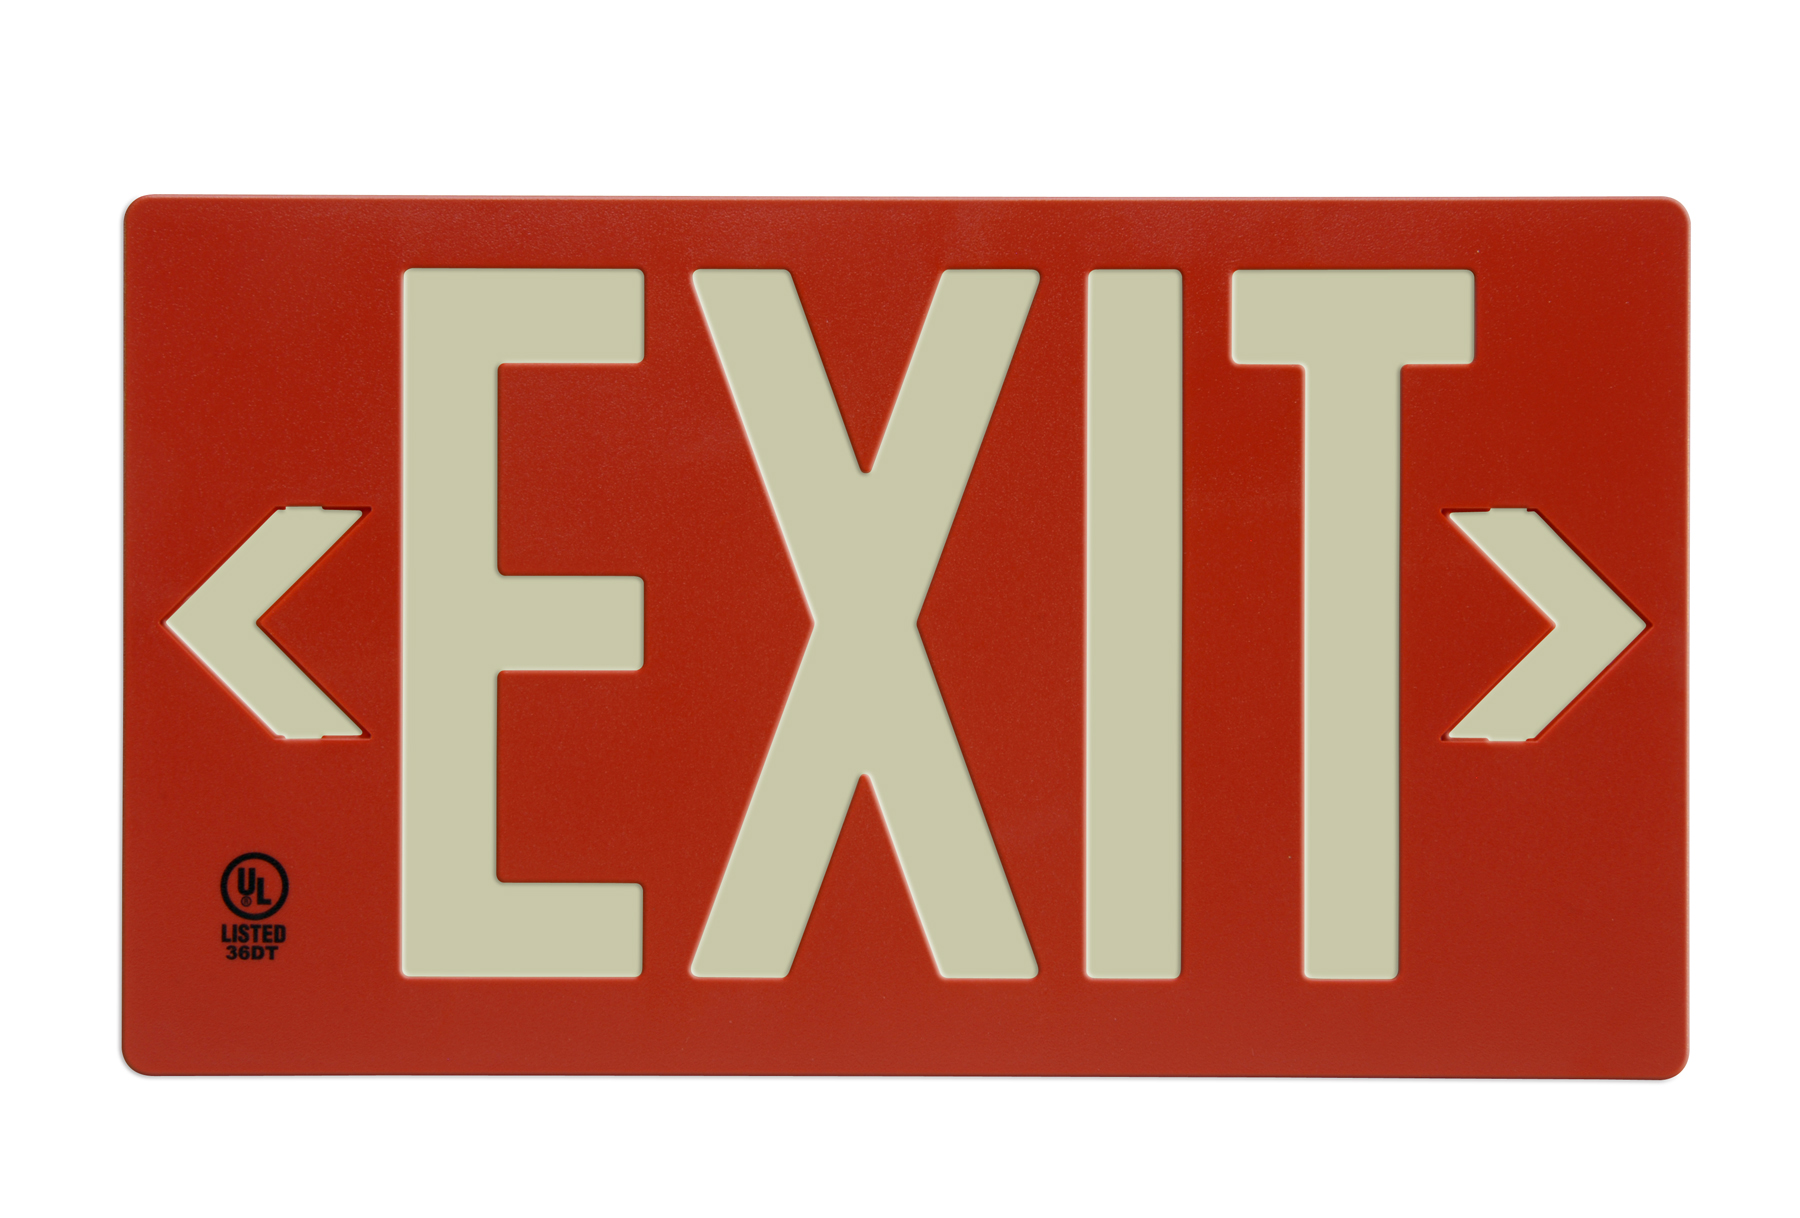 New Photo luminescent Eco Exit Signs from Martinson-Nicholls Use ...